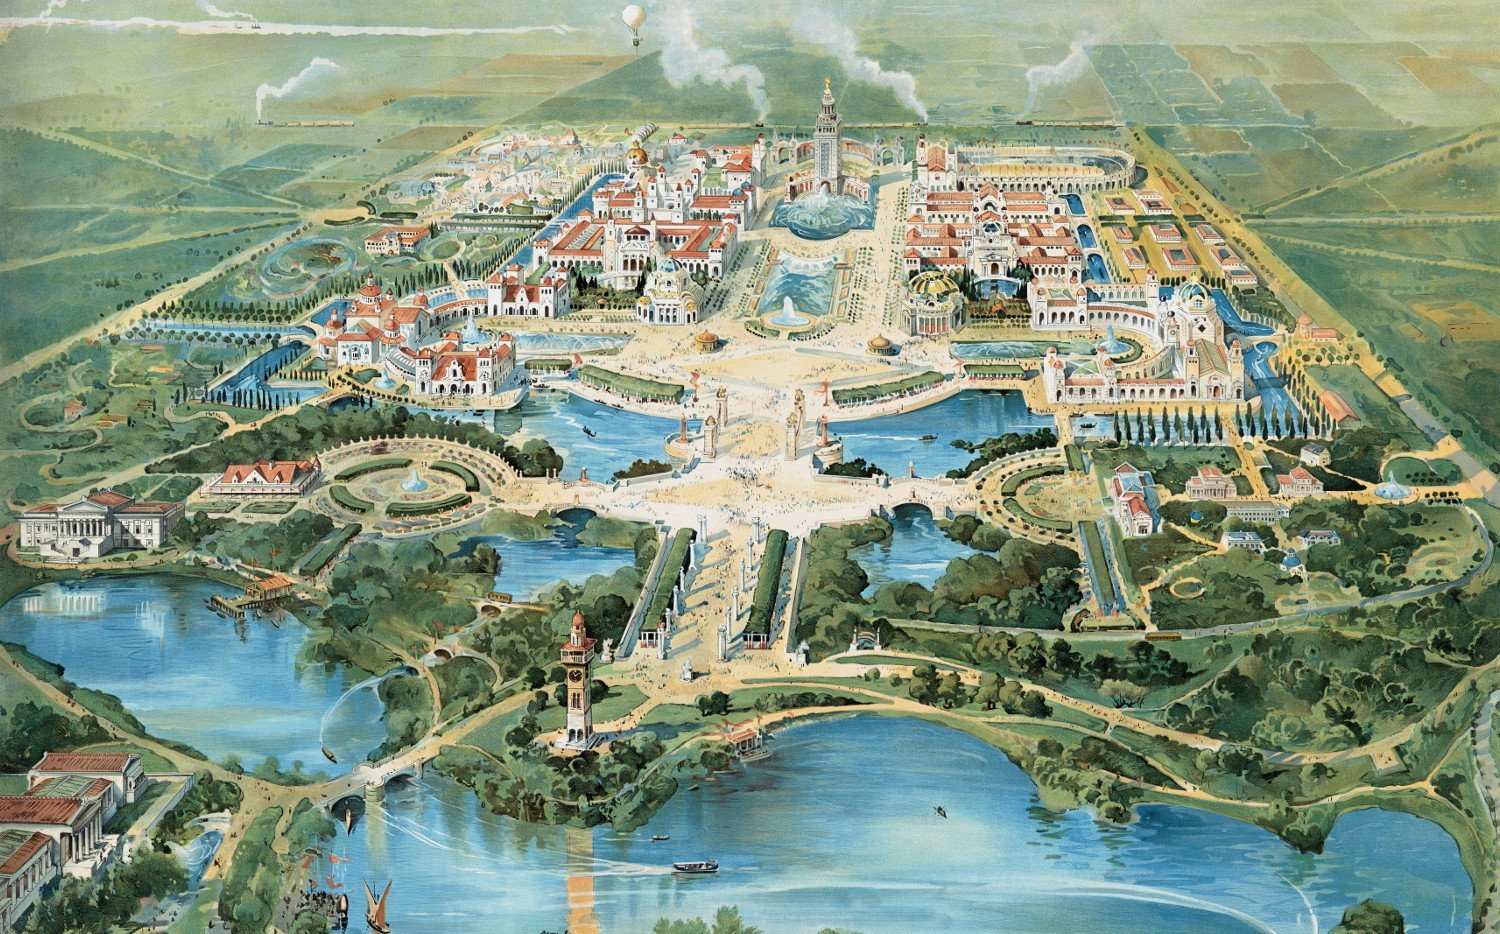 Bird's eye view of Buffalo's Pan-American Exposition of 1901 - KNOWOL